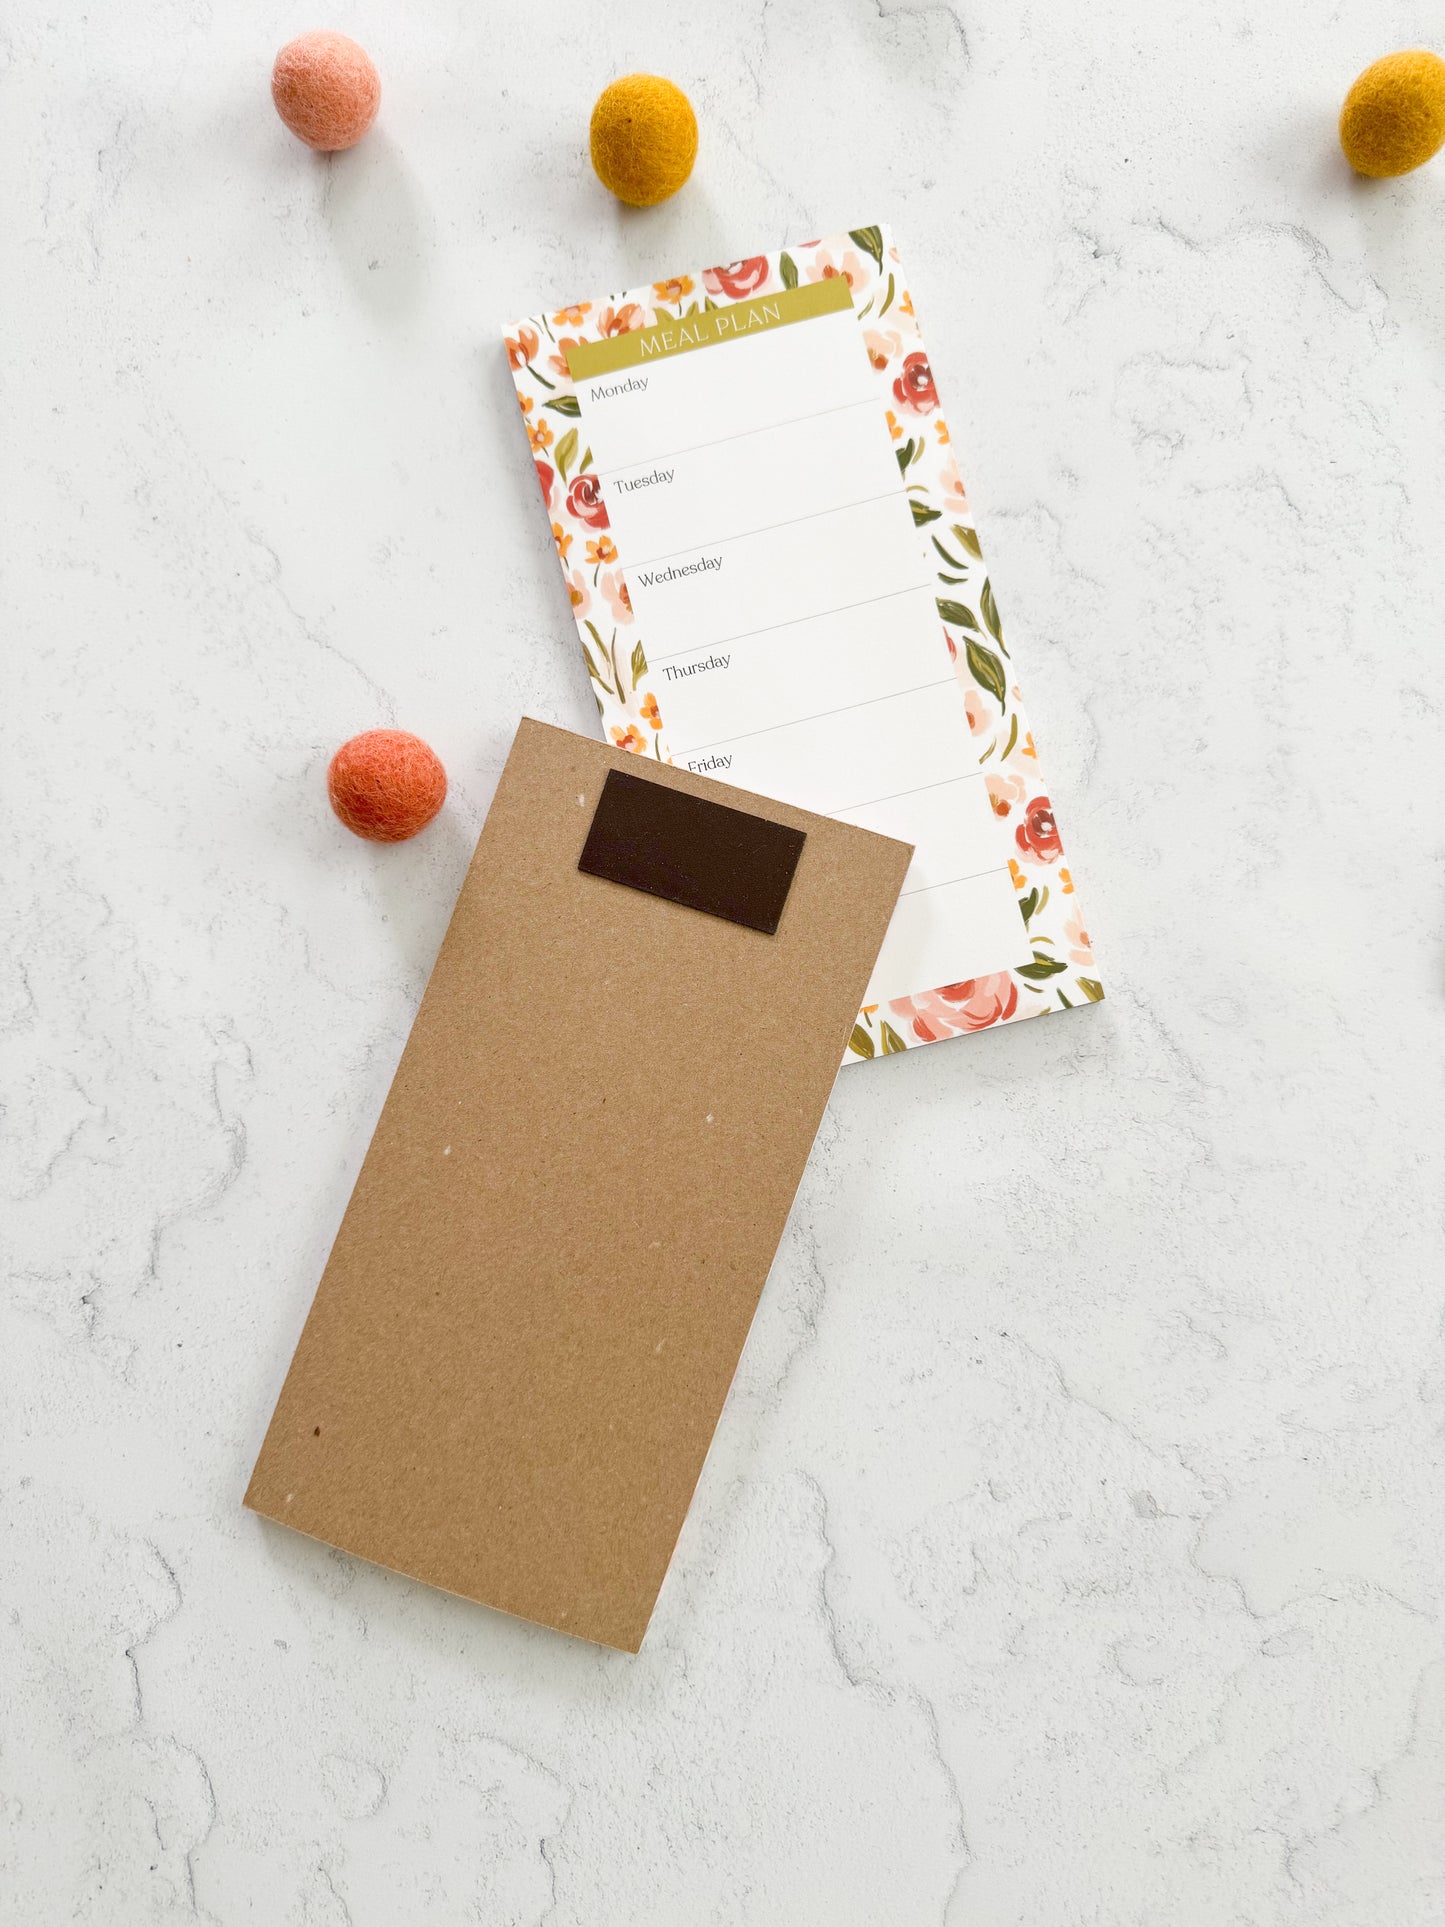 Magnetic Meal Plan Notepad | Summer Meadow